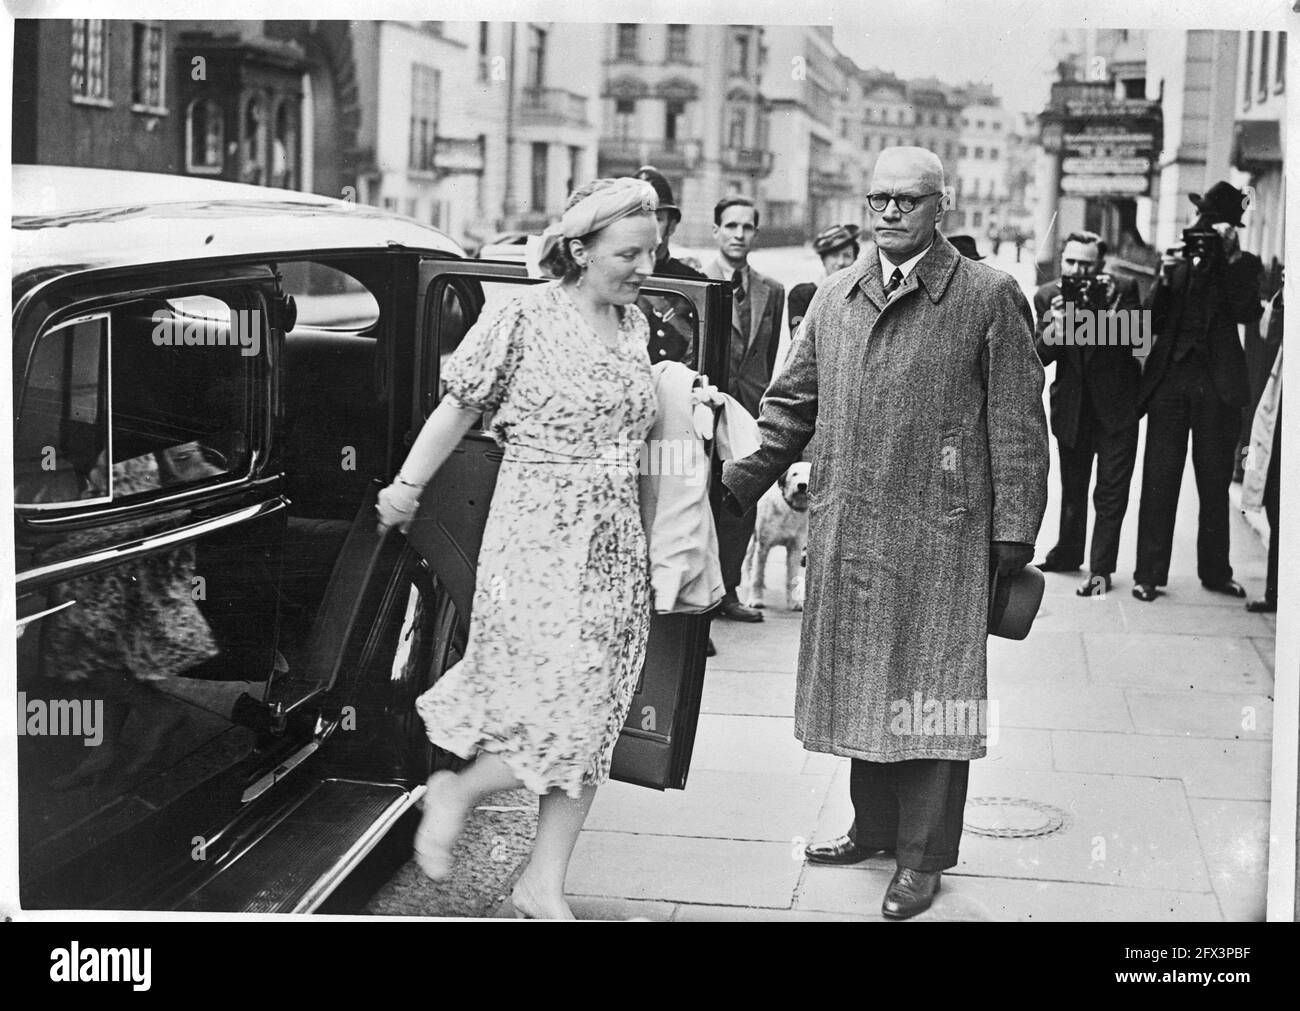 Princess Juliana leaving a car in London, 1940, cars, royal family, princesses, second world war, The Netherlands, 20th century press agency photo, news to remember, documentary, historic photography 1945-1990, visual stories, human history of the Twentieth Century, capturing moments in time Stock Photo